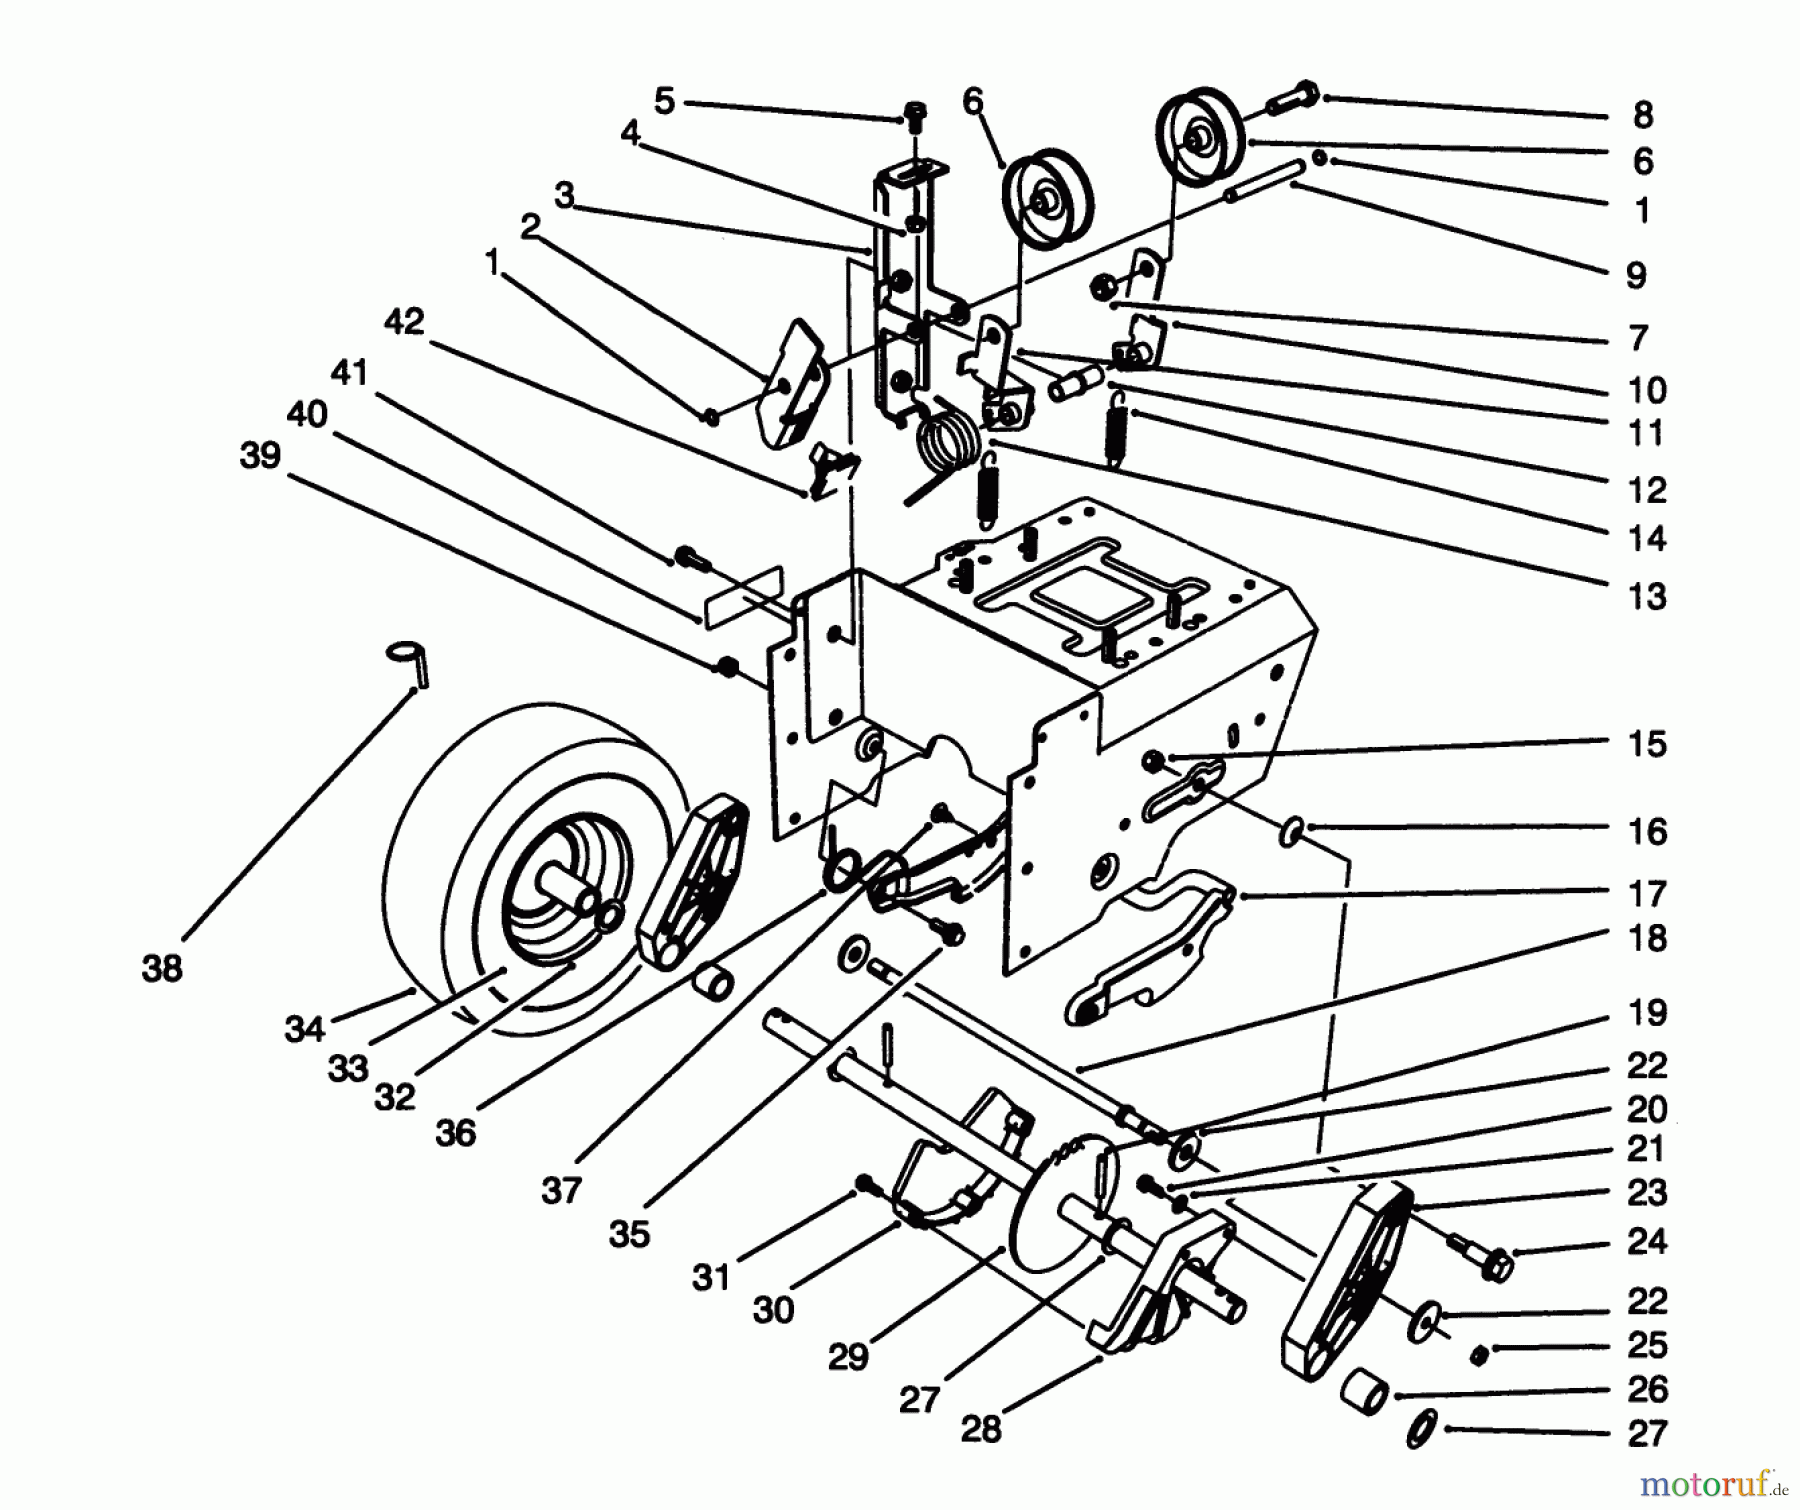  Toro Neu Snow Blowers/Snow Throwers Seite 1 38566 (1132) - Toro 1132 Power Shift Snowthrower, 1995 (59000001-59999999) TRACTION DRIVE ASSEMBLY